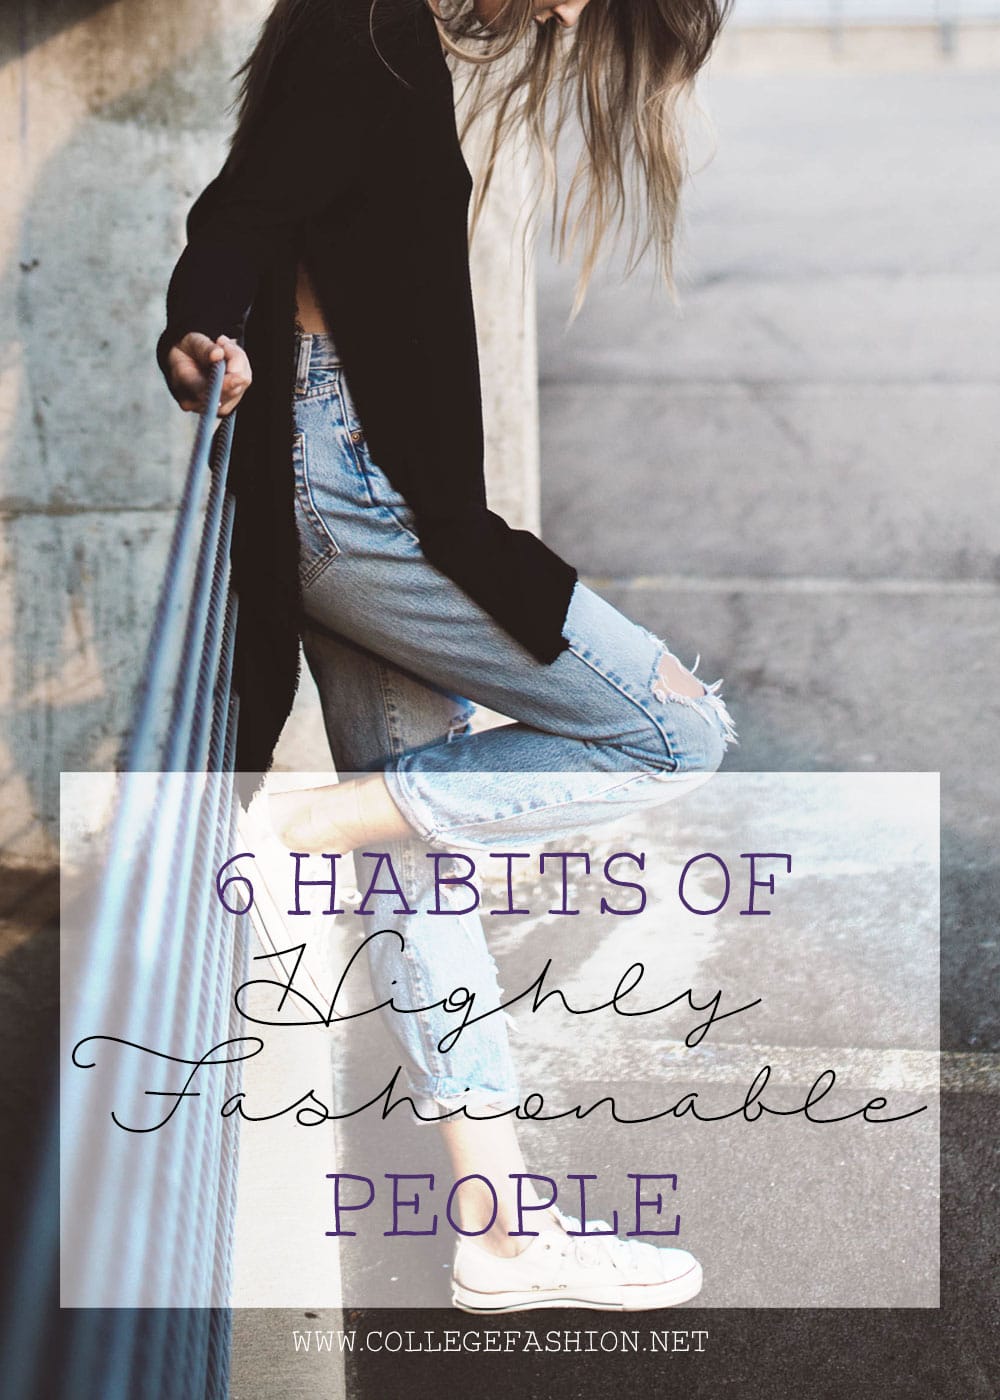 6 habits of highly fashionable people